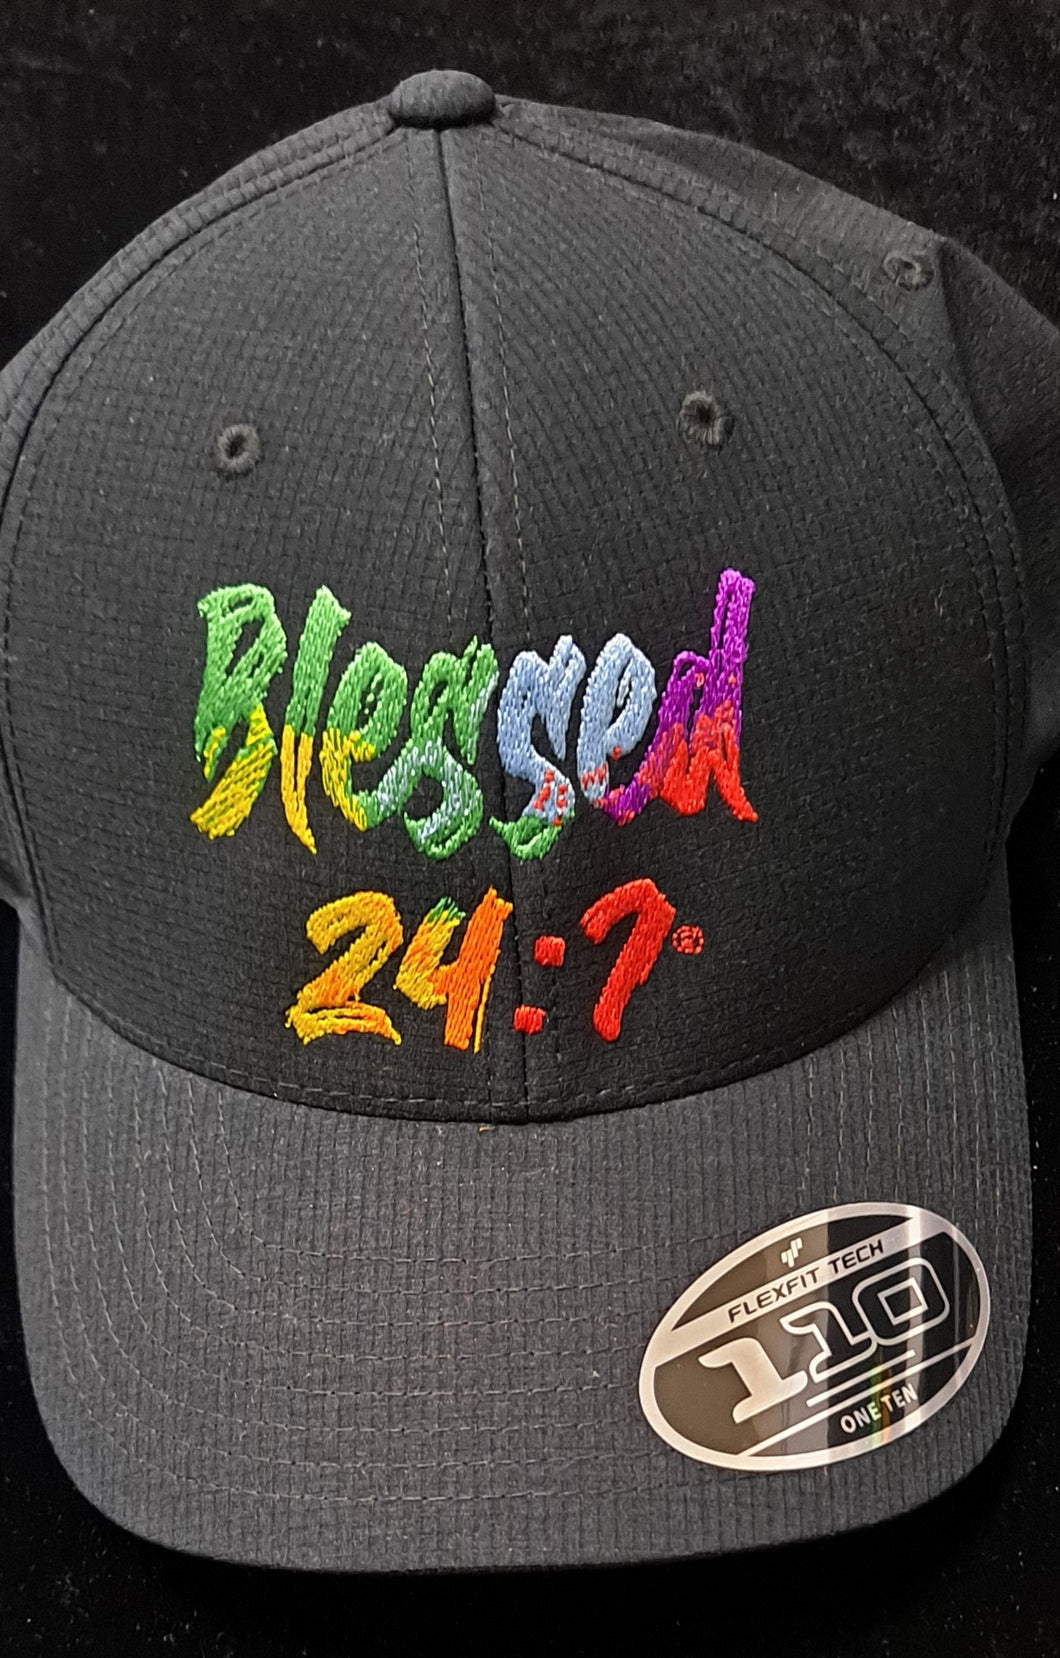 Blessed 24:7®️ Hat/Cap Flexfit Performance Snapback □ FREE Shipping